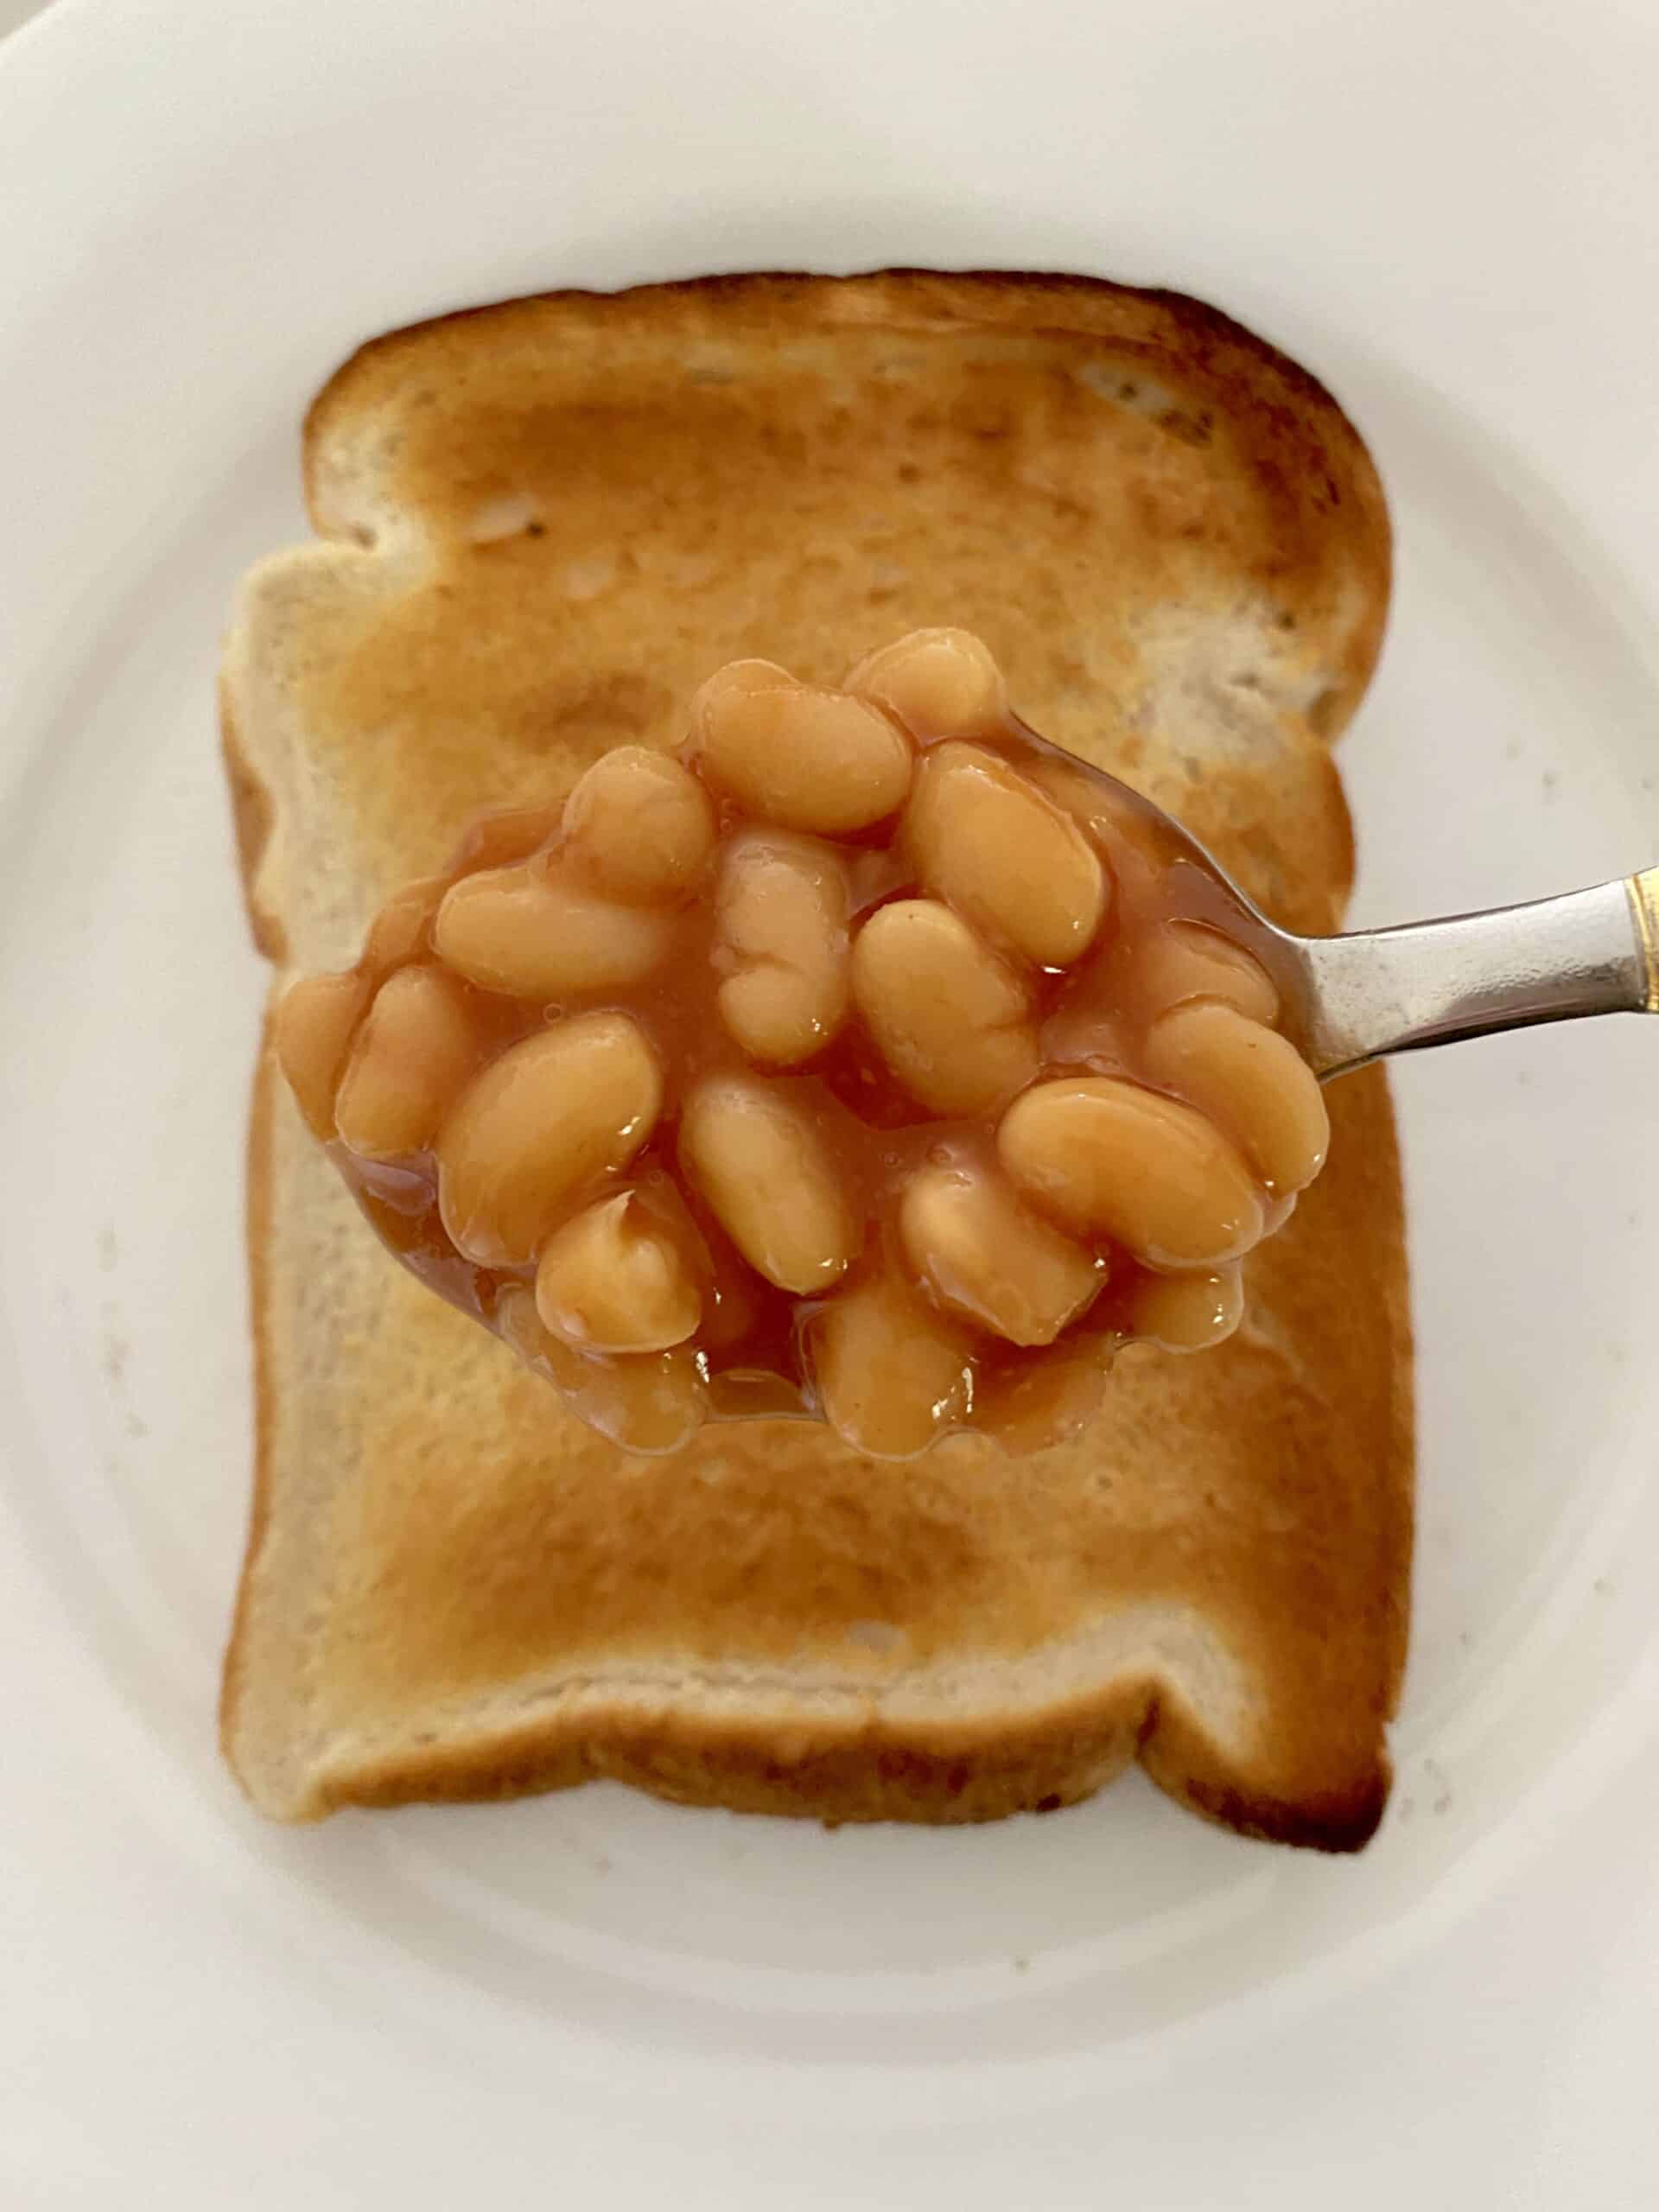 putting beans on the toast